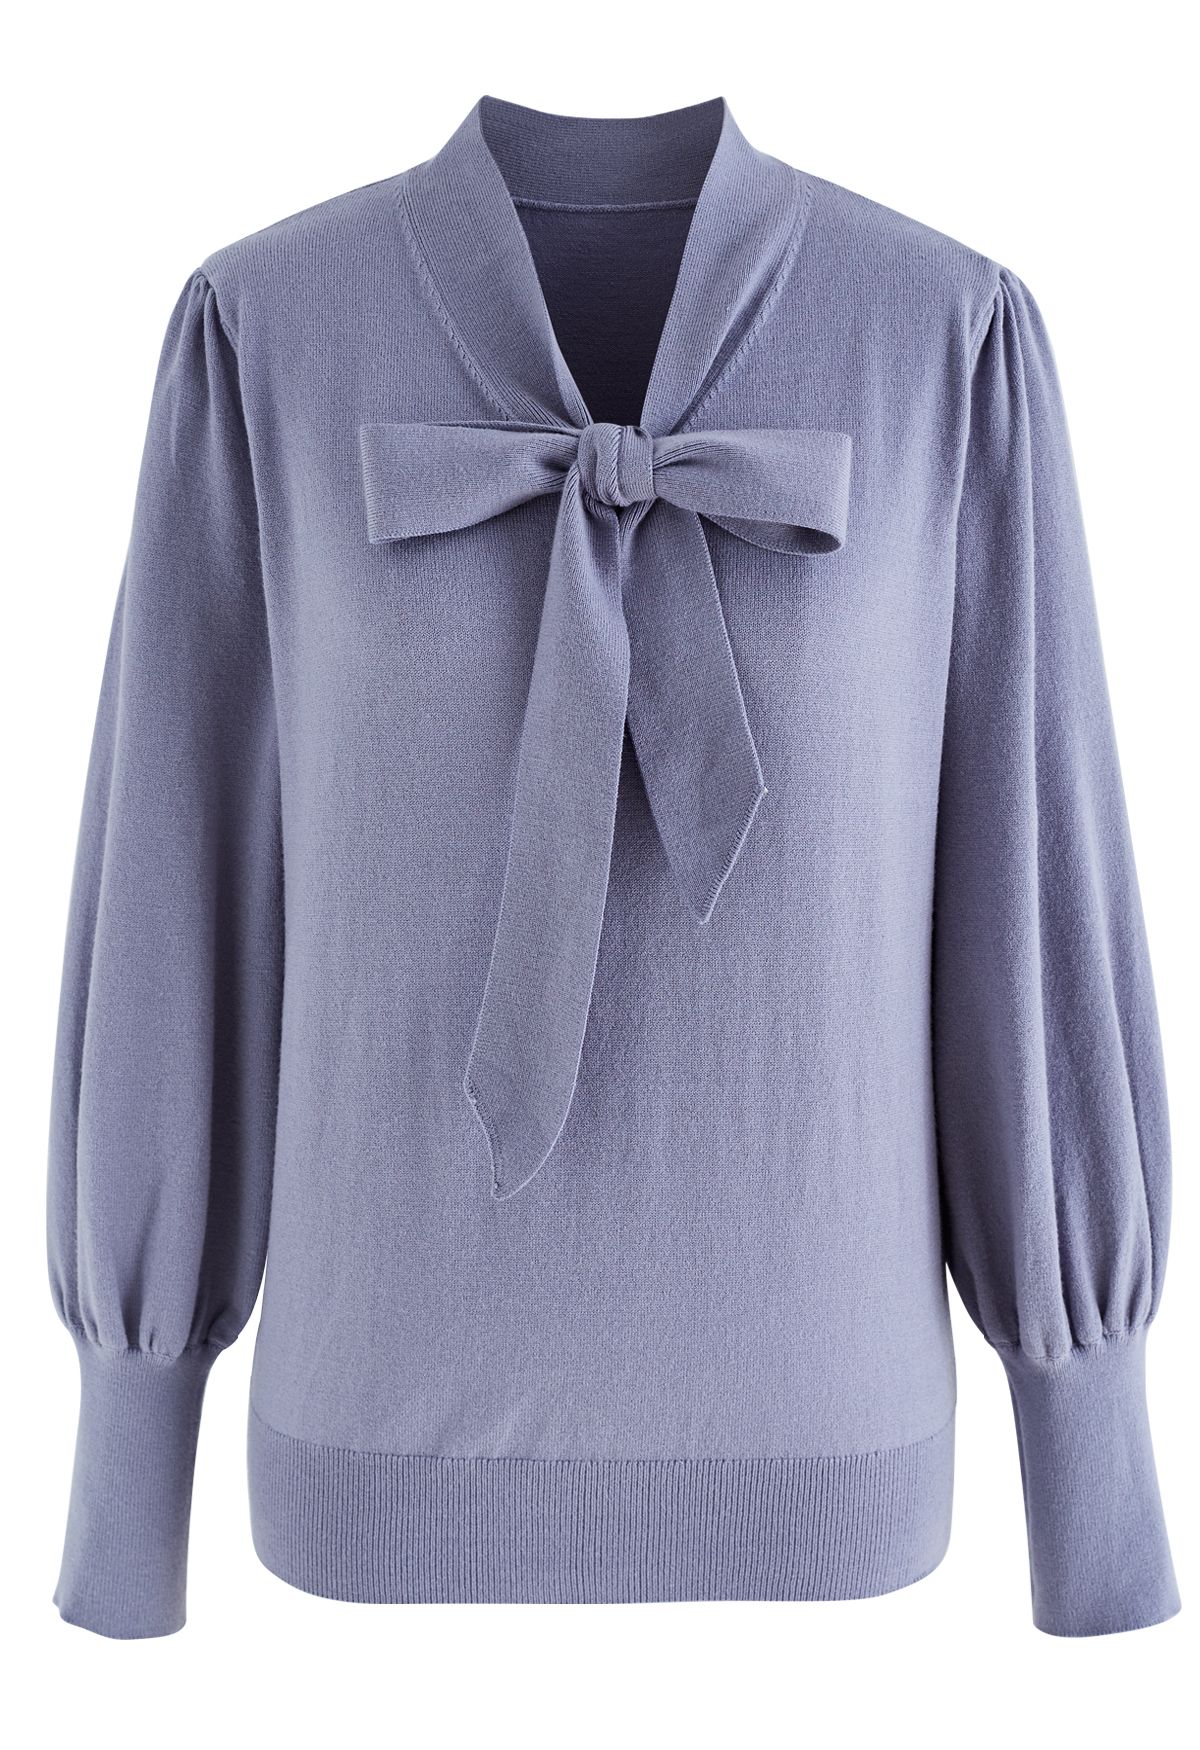 Bow Neck Sleeves Knit Top in Dusty Blue